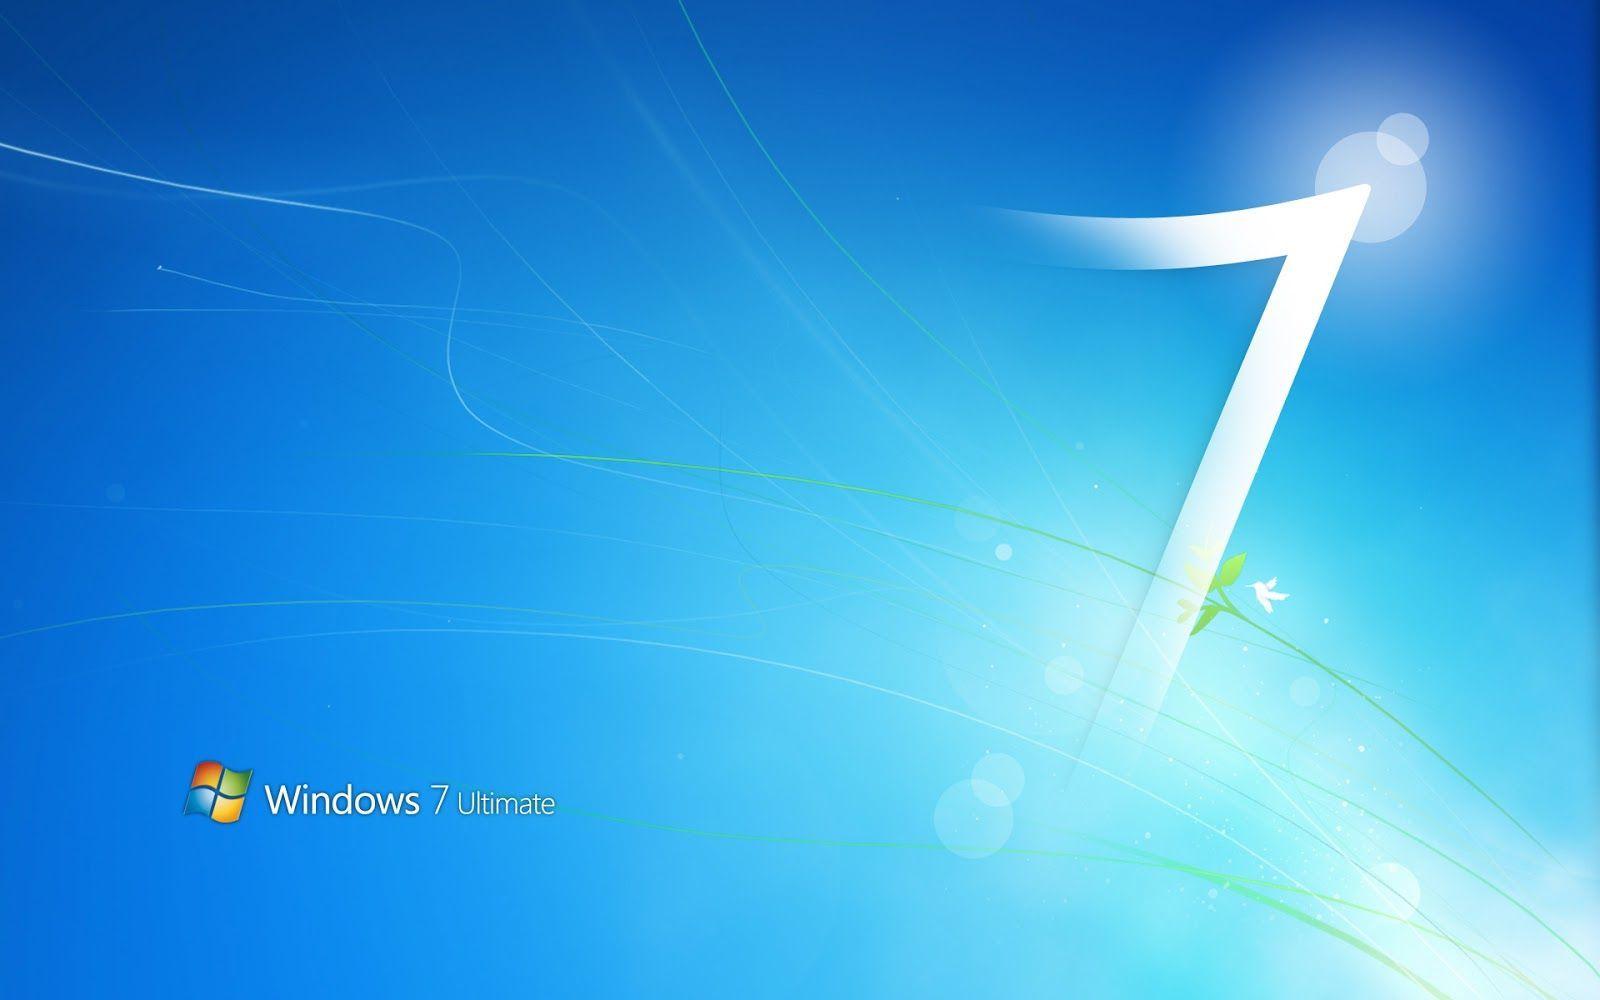 Top 10 Color Windows 7 Ultimate HD Wallpapers ~ Themes For Windows